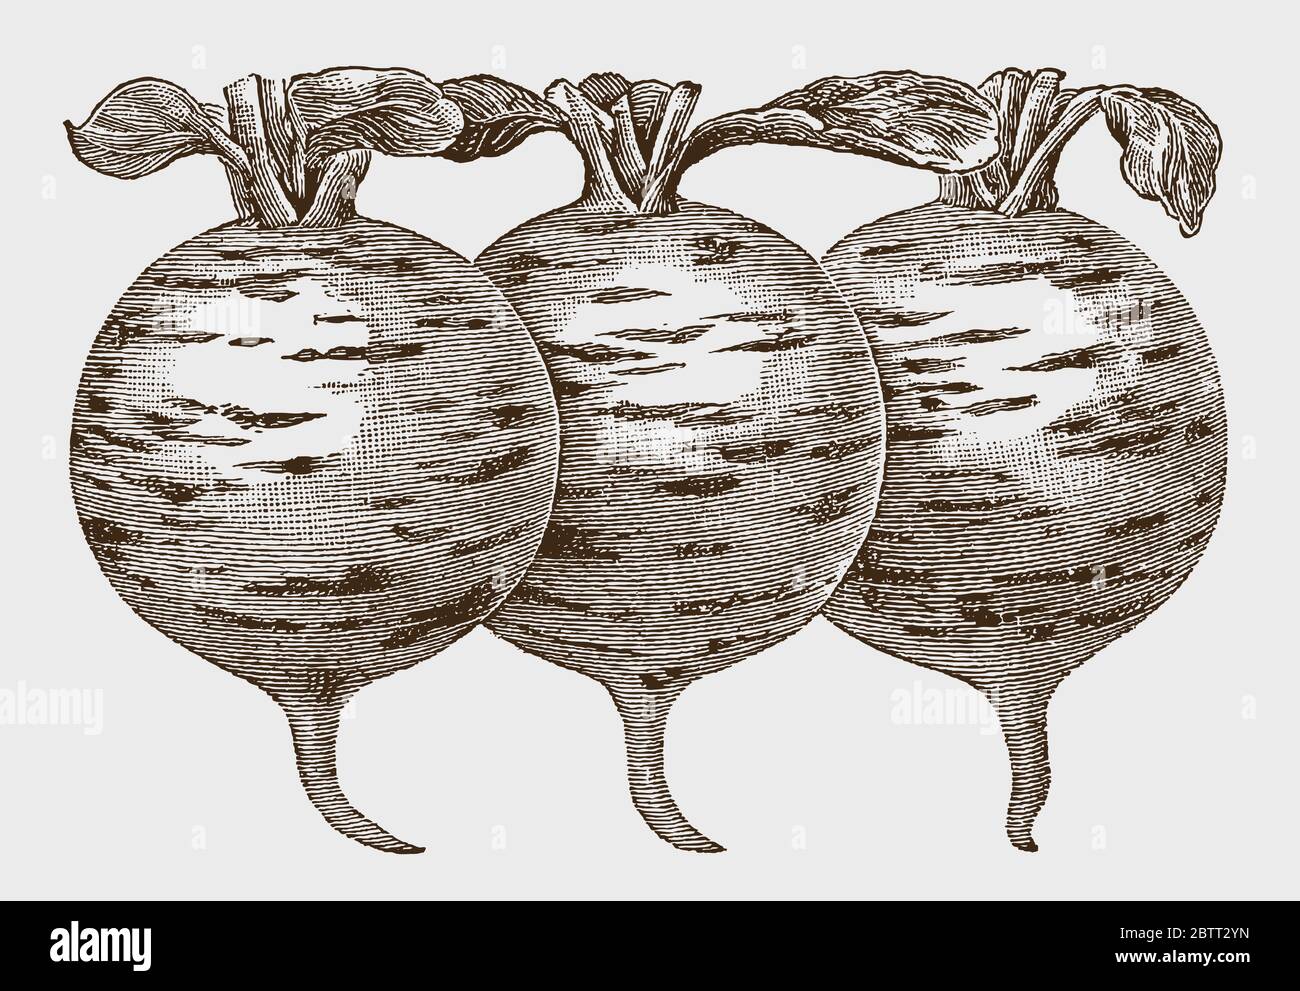 Three white, striped radishes in a row, after a historical engraving from the early 20th century Stock Vector